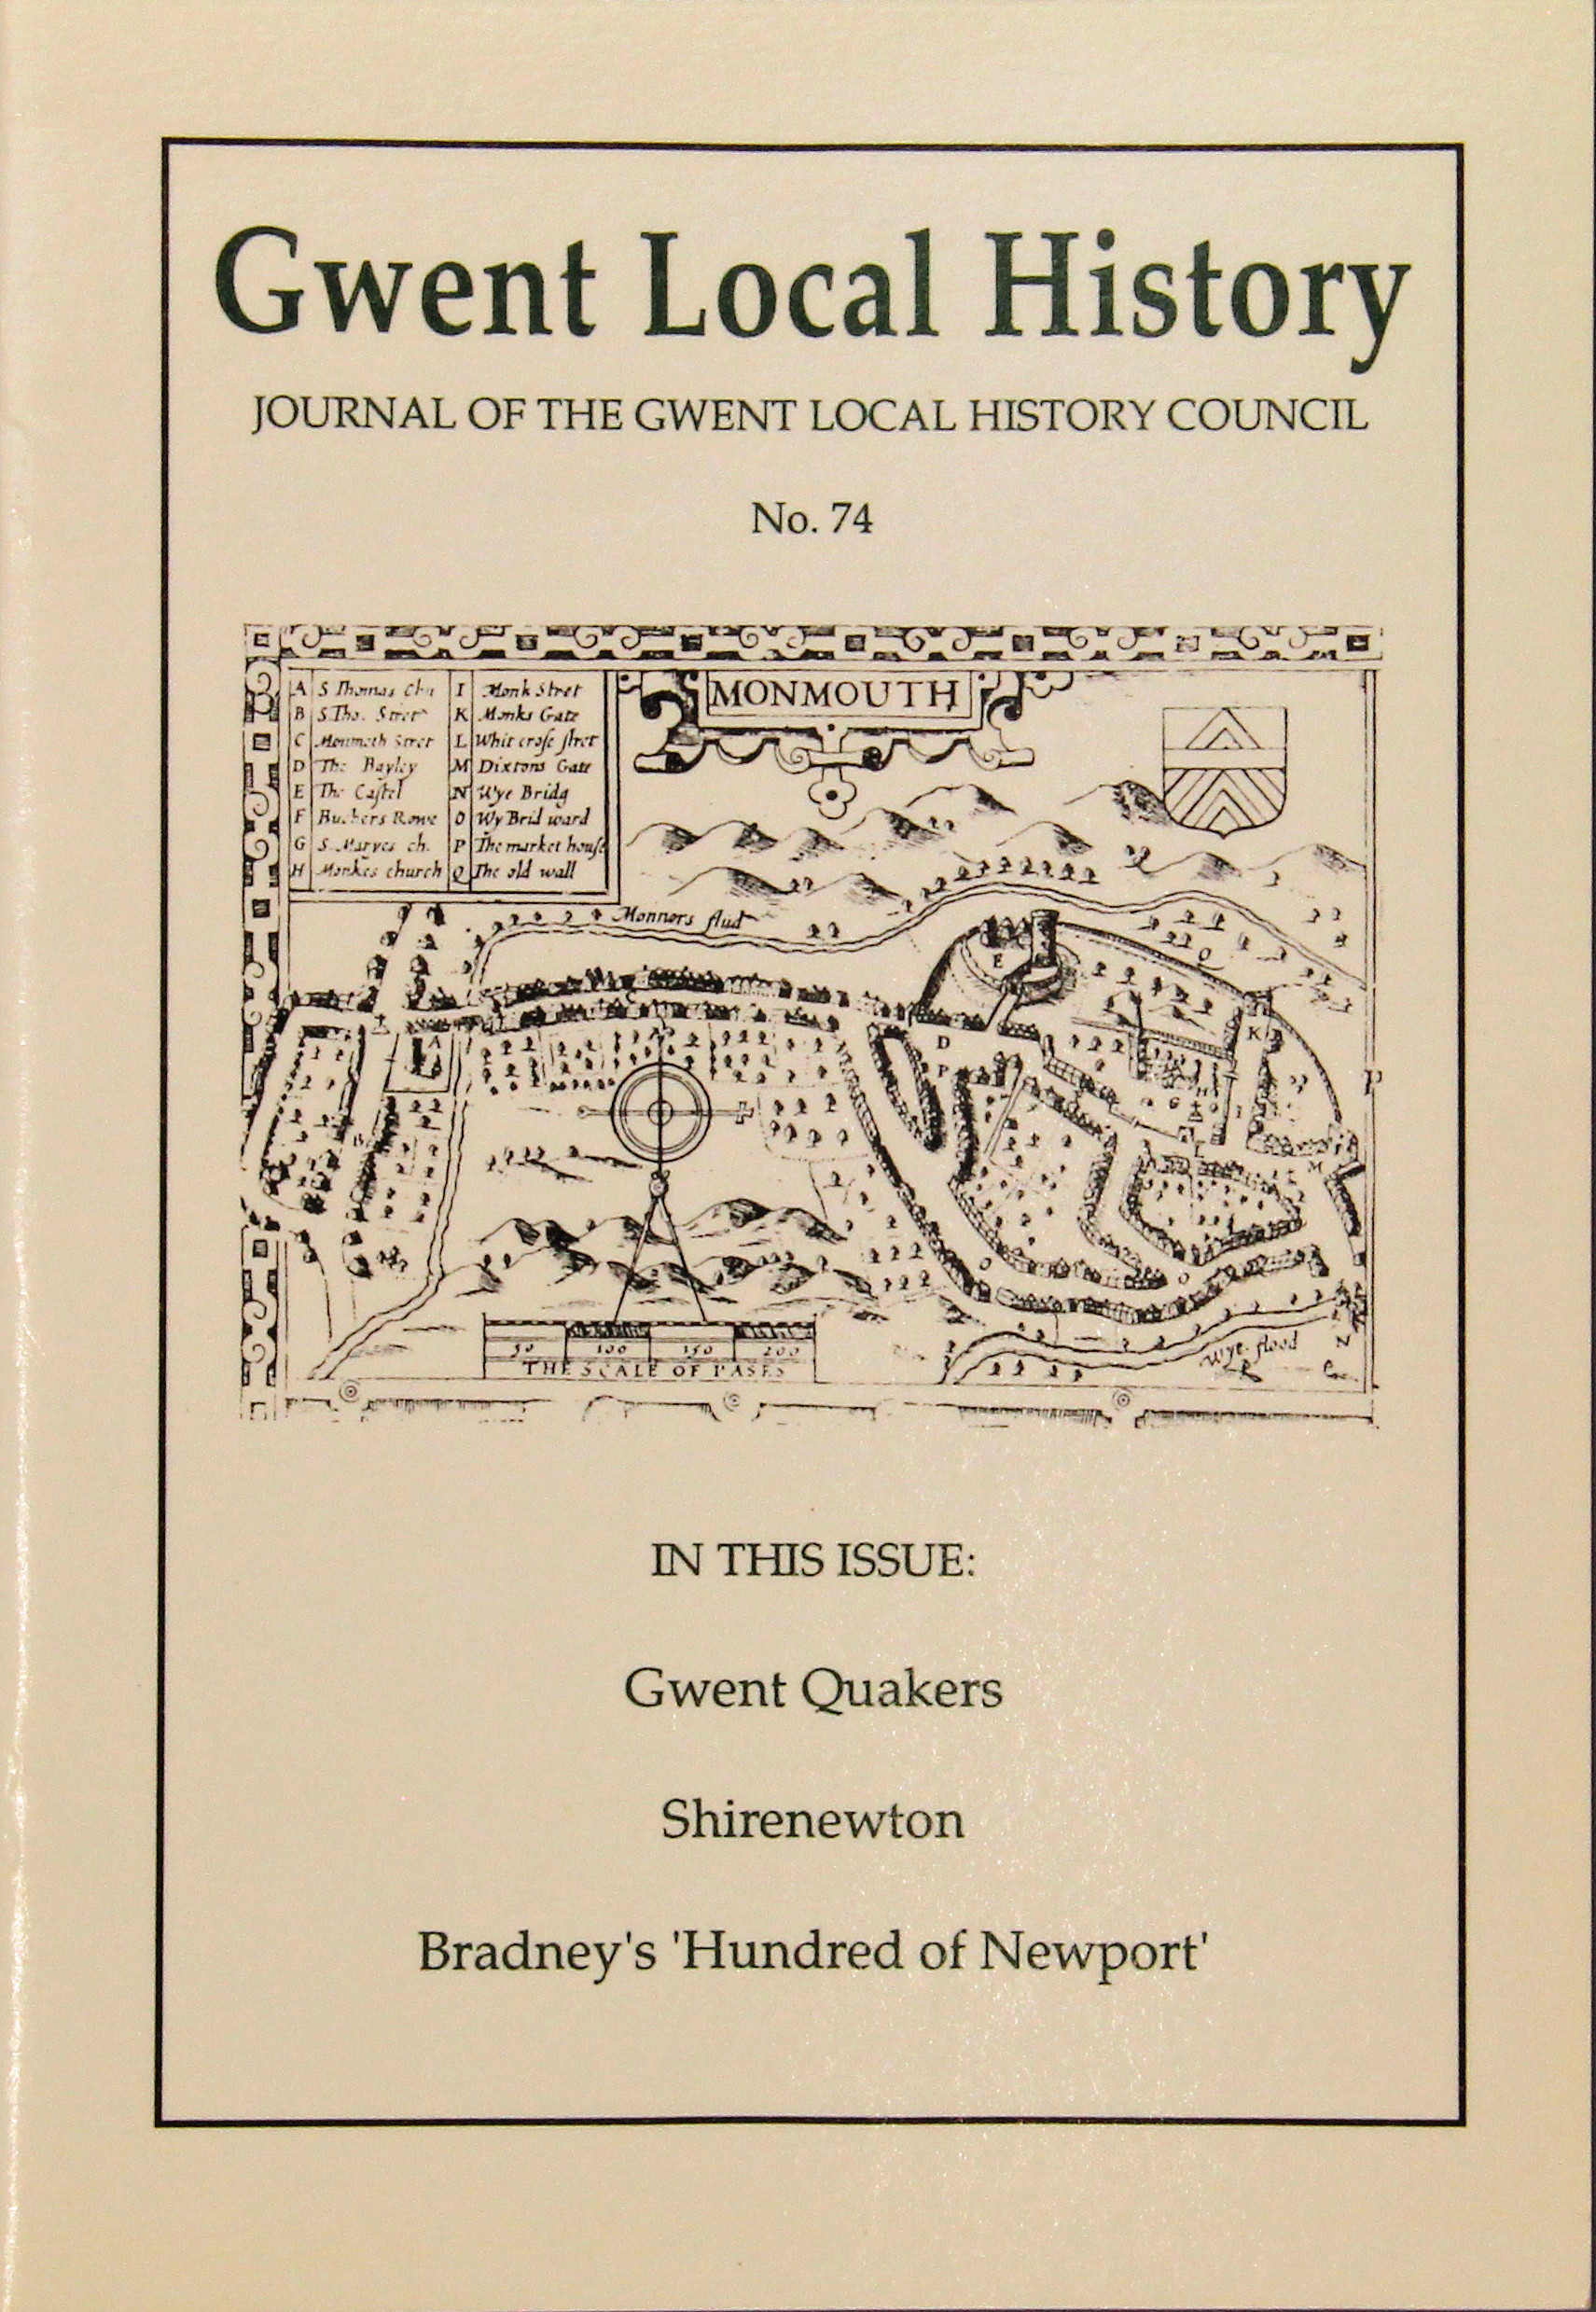 Gwent Local History: Journal of the Gwent Local History Council No.74, Spring 1993, £2.00